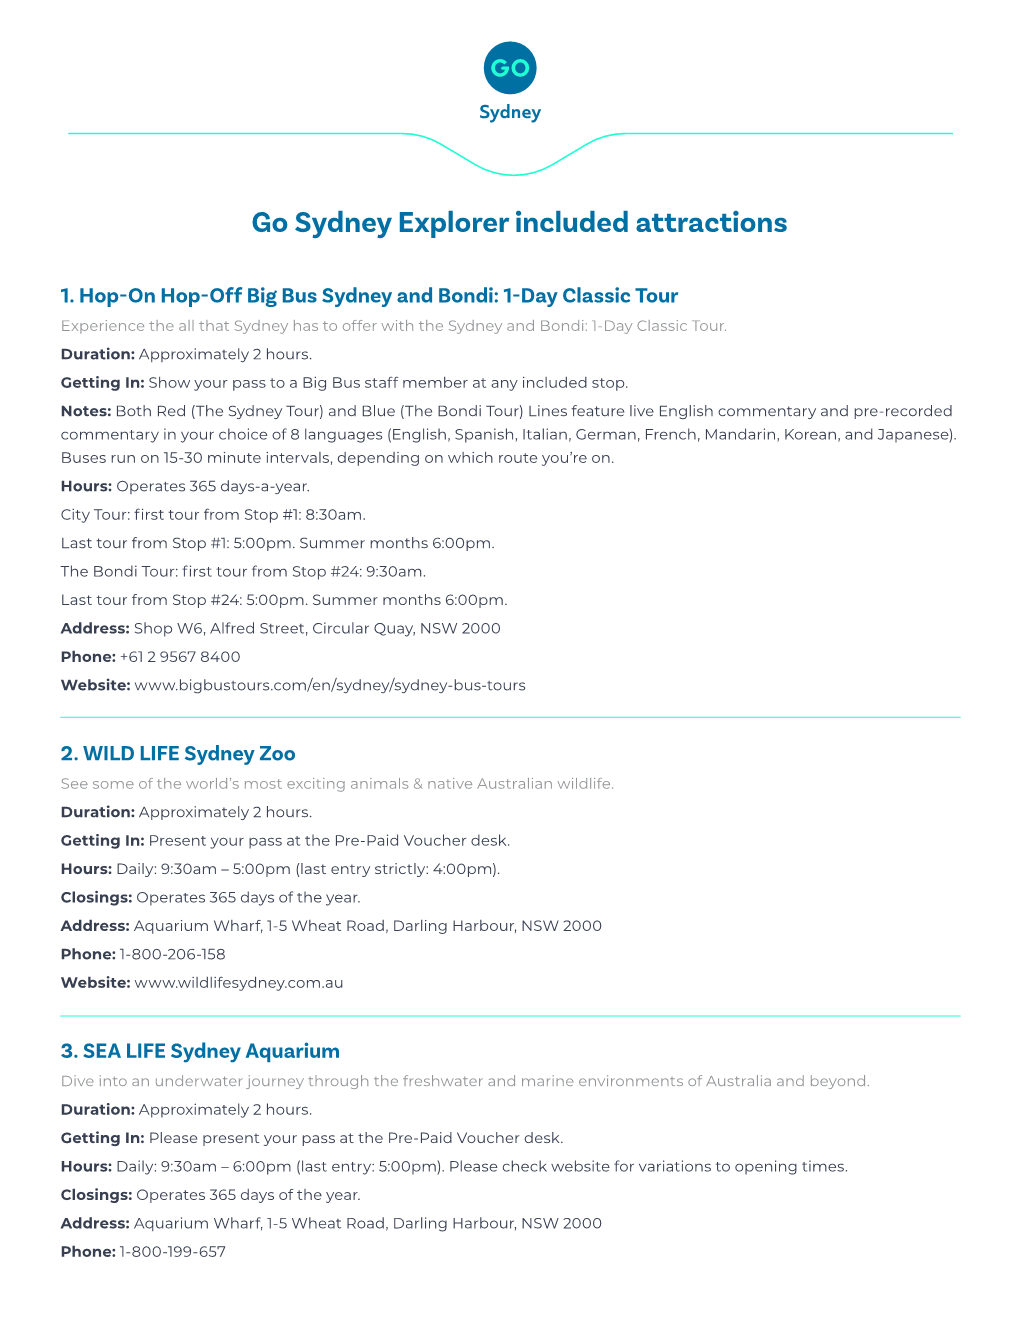 Go Sydney Explorer Included Attractions